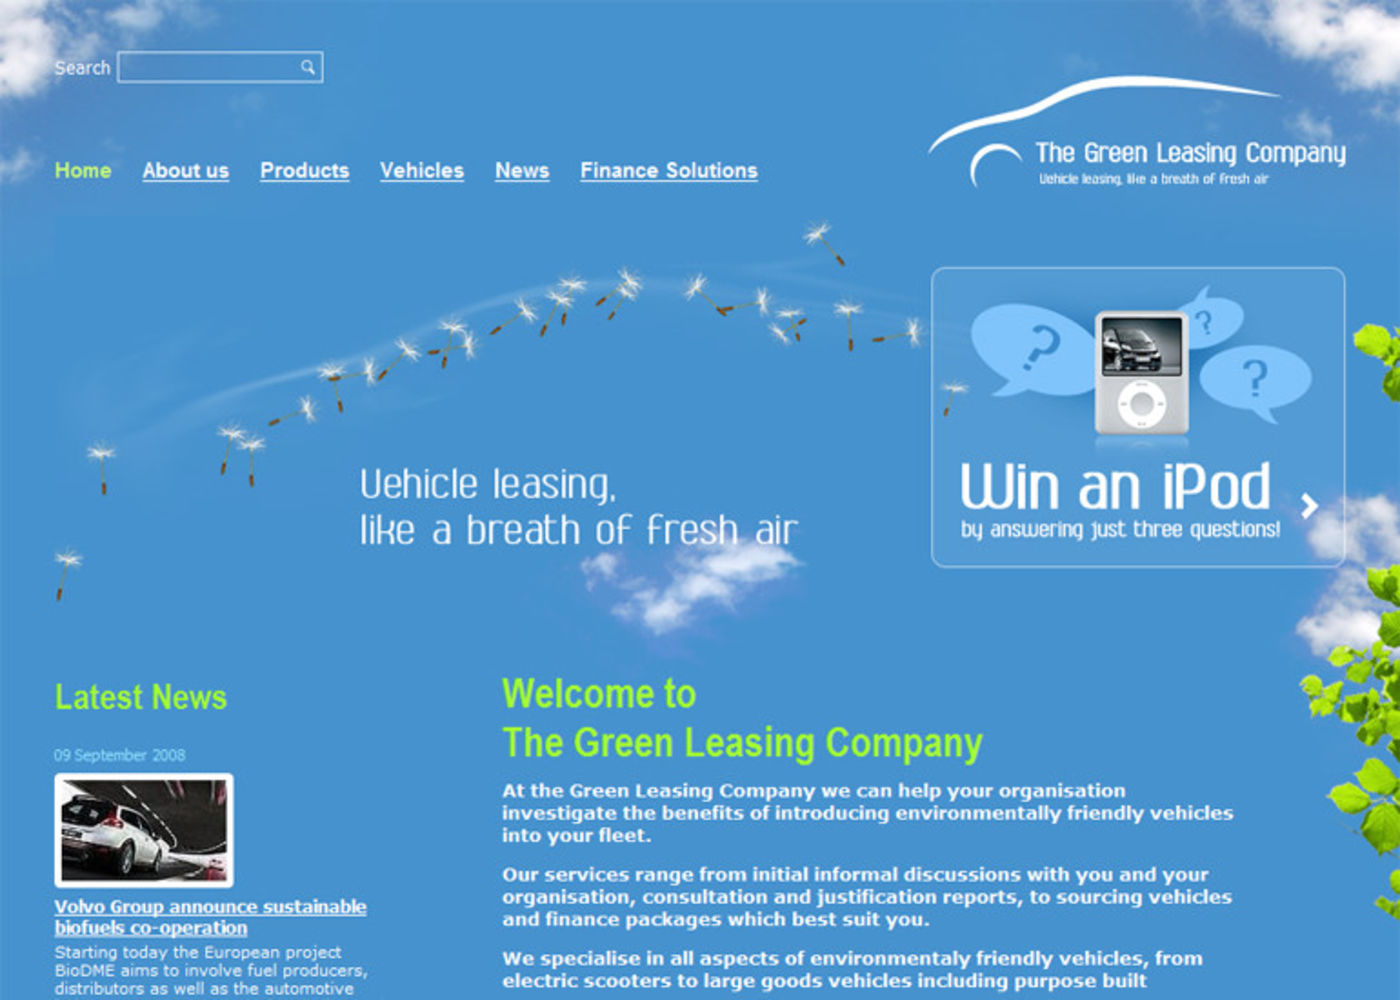 The Green Leasing Company Homepage header